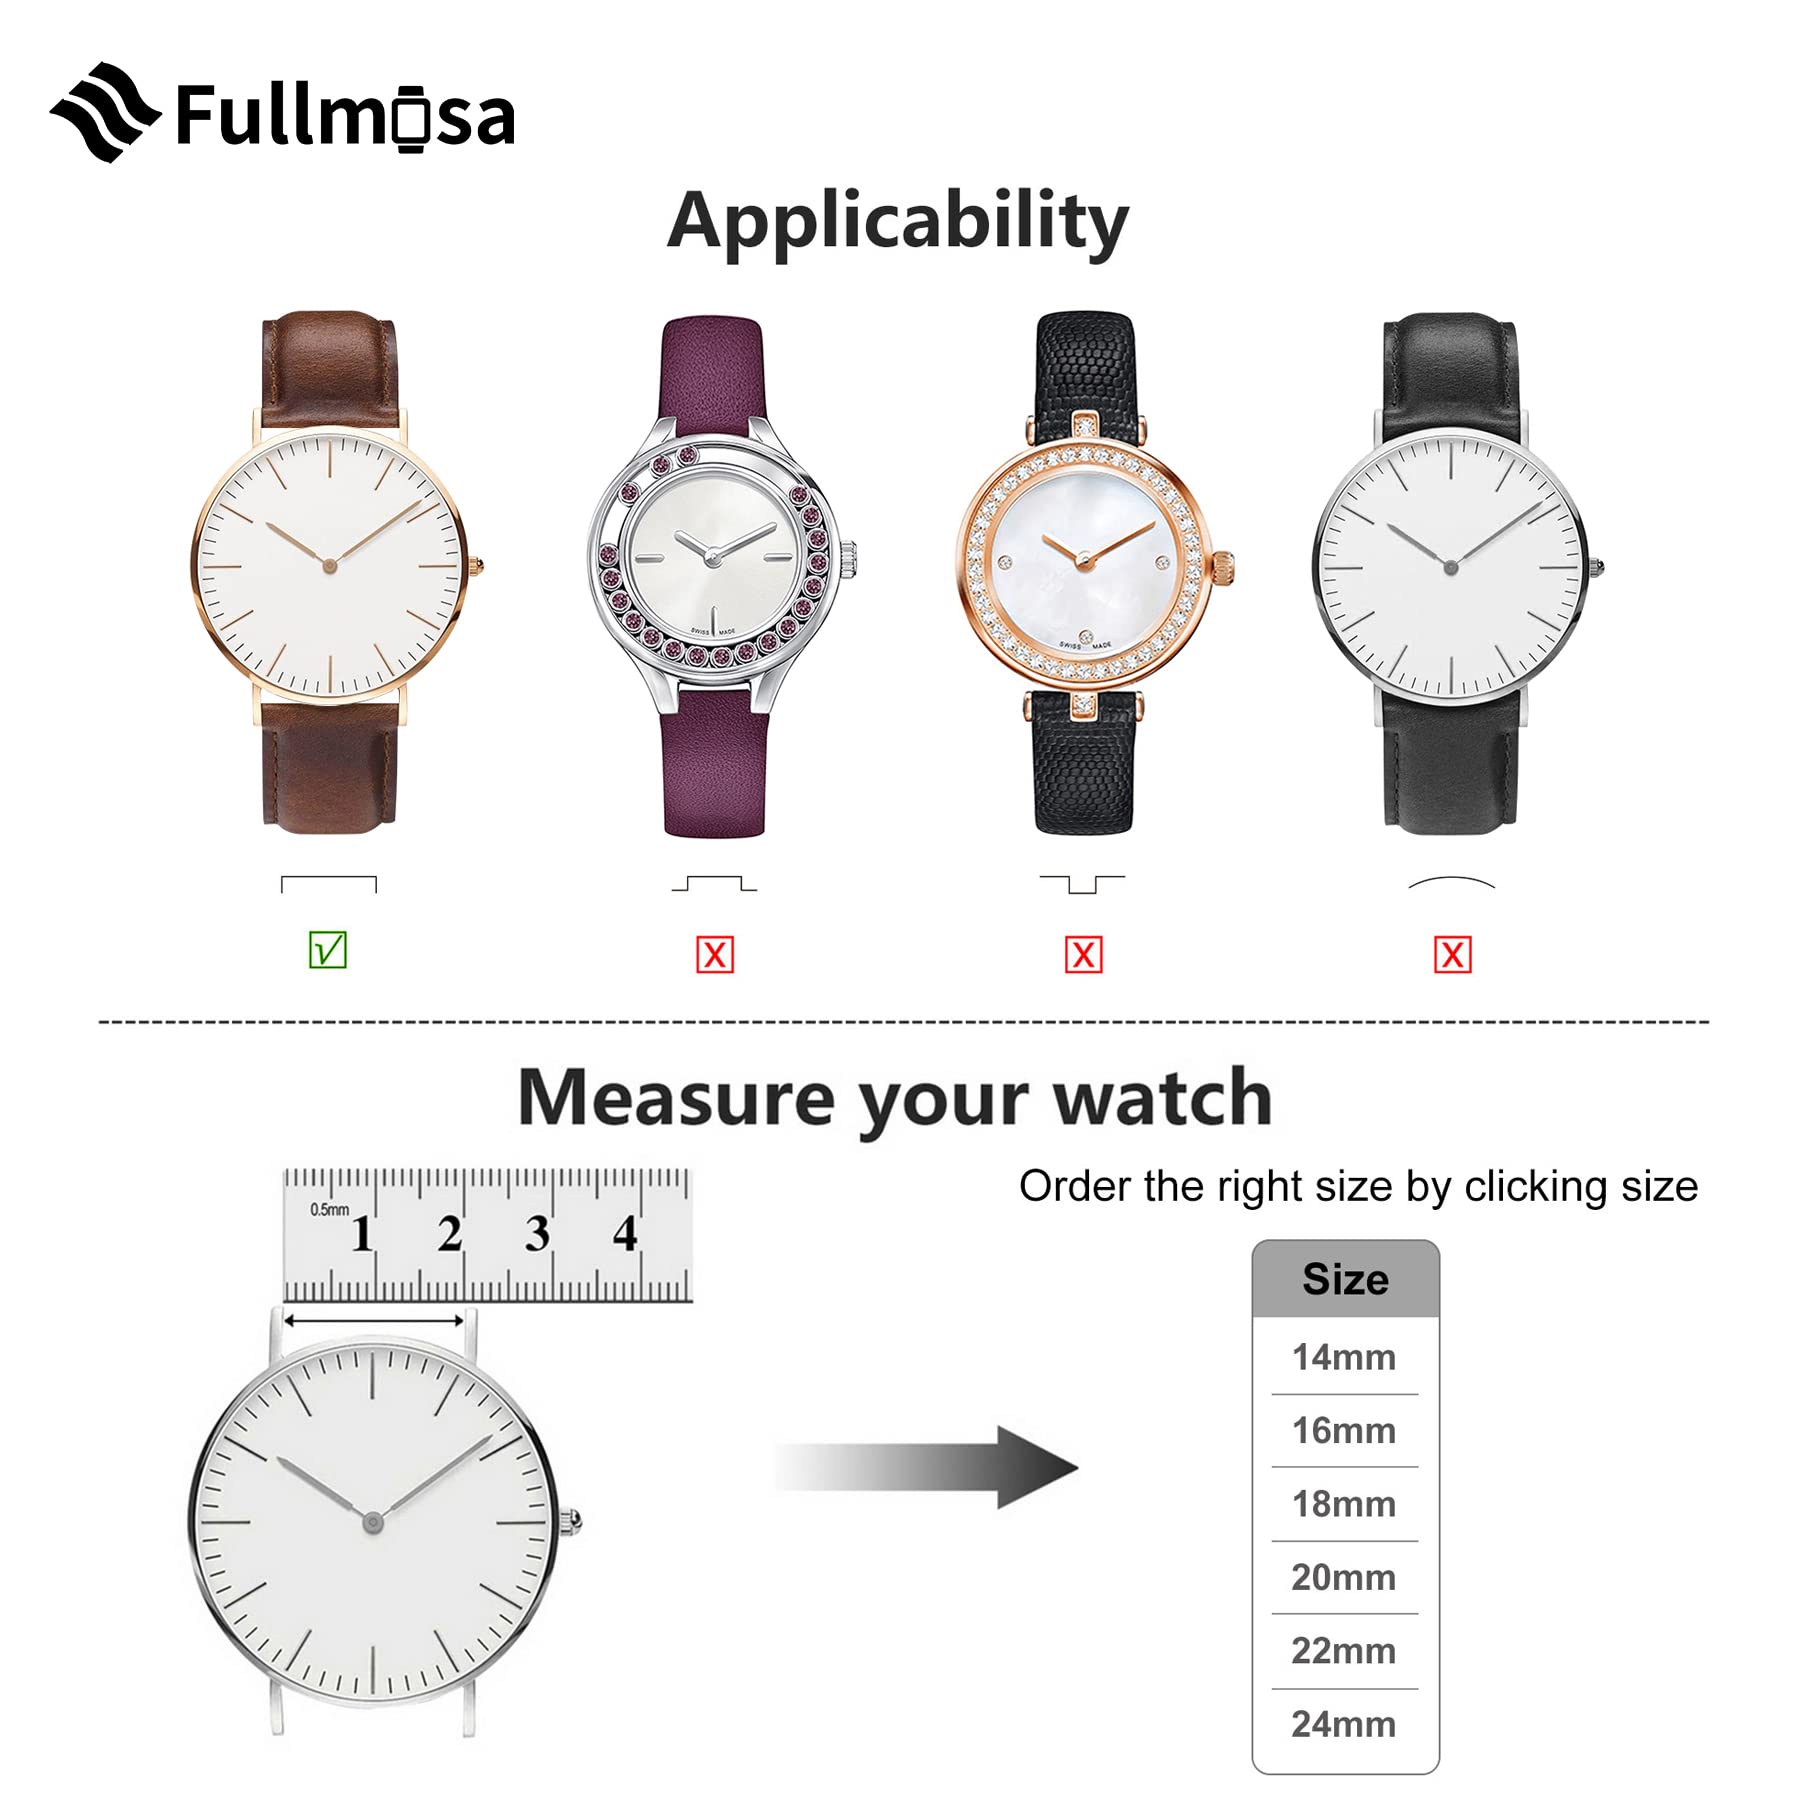 Fullmosa 22mm Leather Watch Bands Compatible with Samsung Galaxy Watch 46mm,Galaxy Watch 3 45mm,Gear S3 Frontier/Classic,Huawei Watch GT,Garmin Vivoactive 4/Forerunner 945,Grey